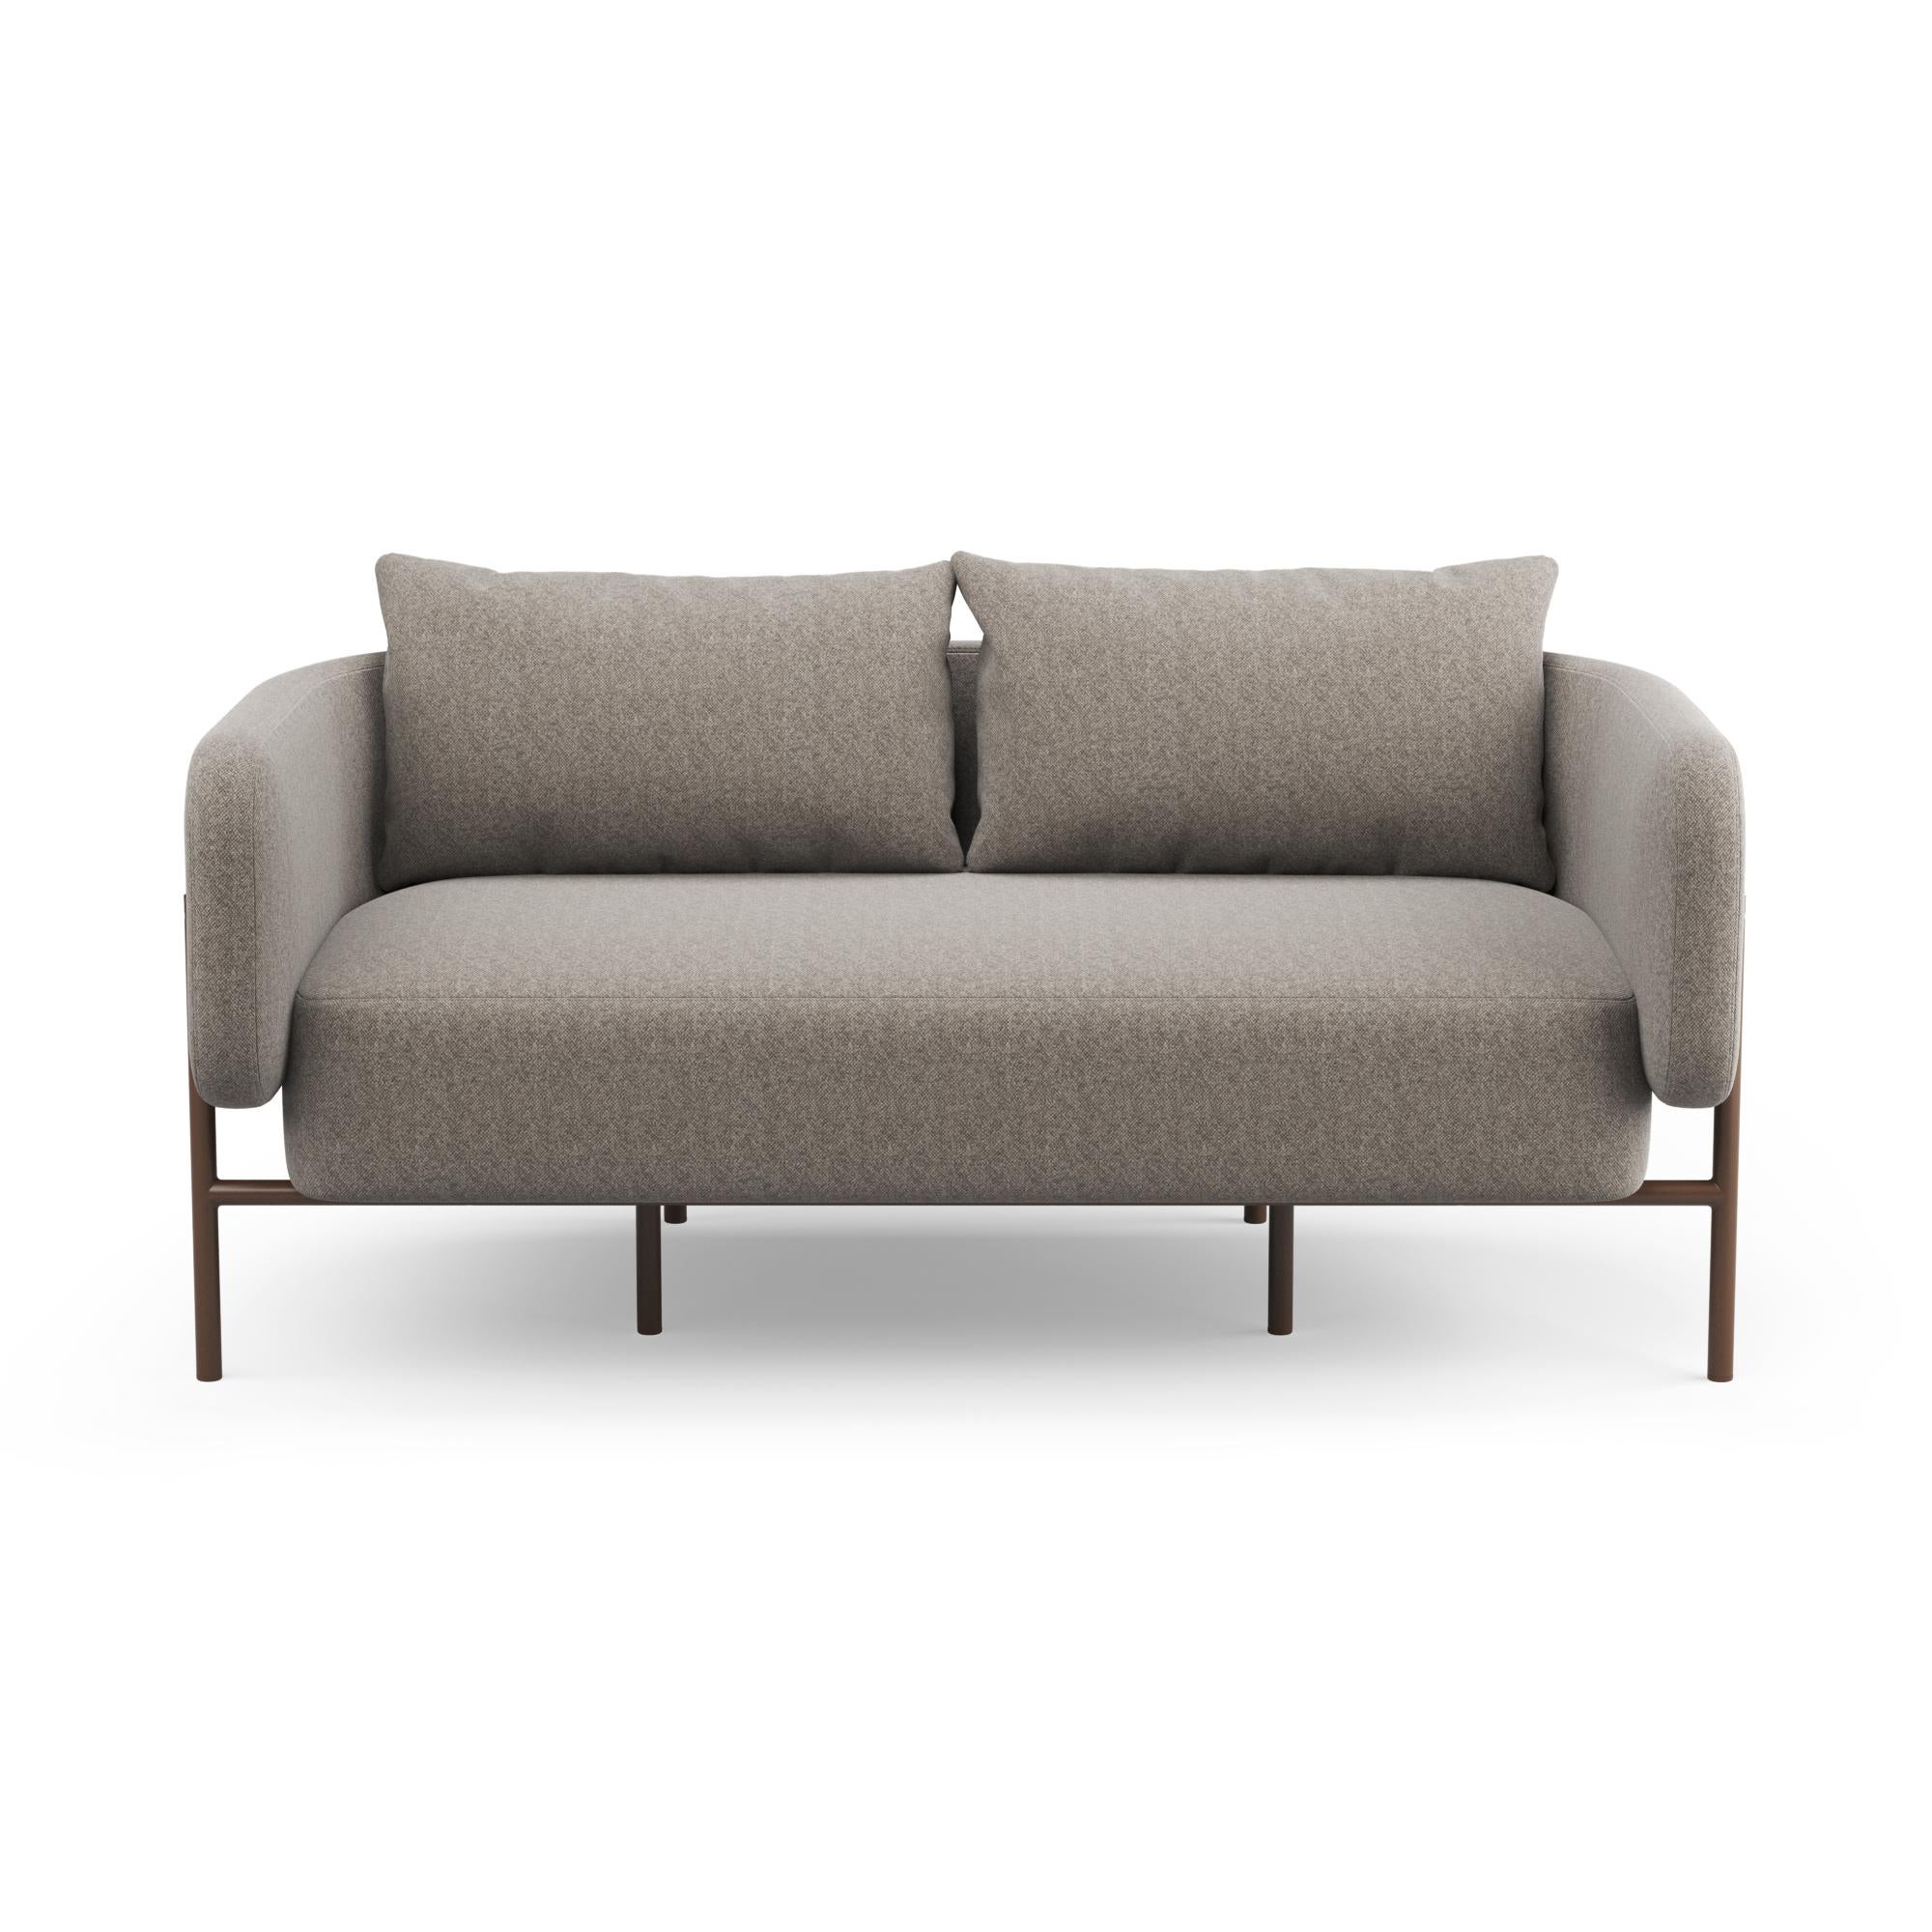 Modern Hayche Abrazo 2 Seater Sofa - Brown, UK, Made to Order For Sale